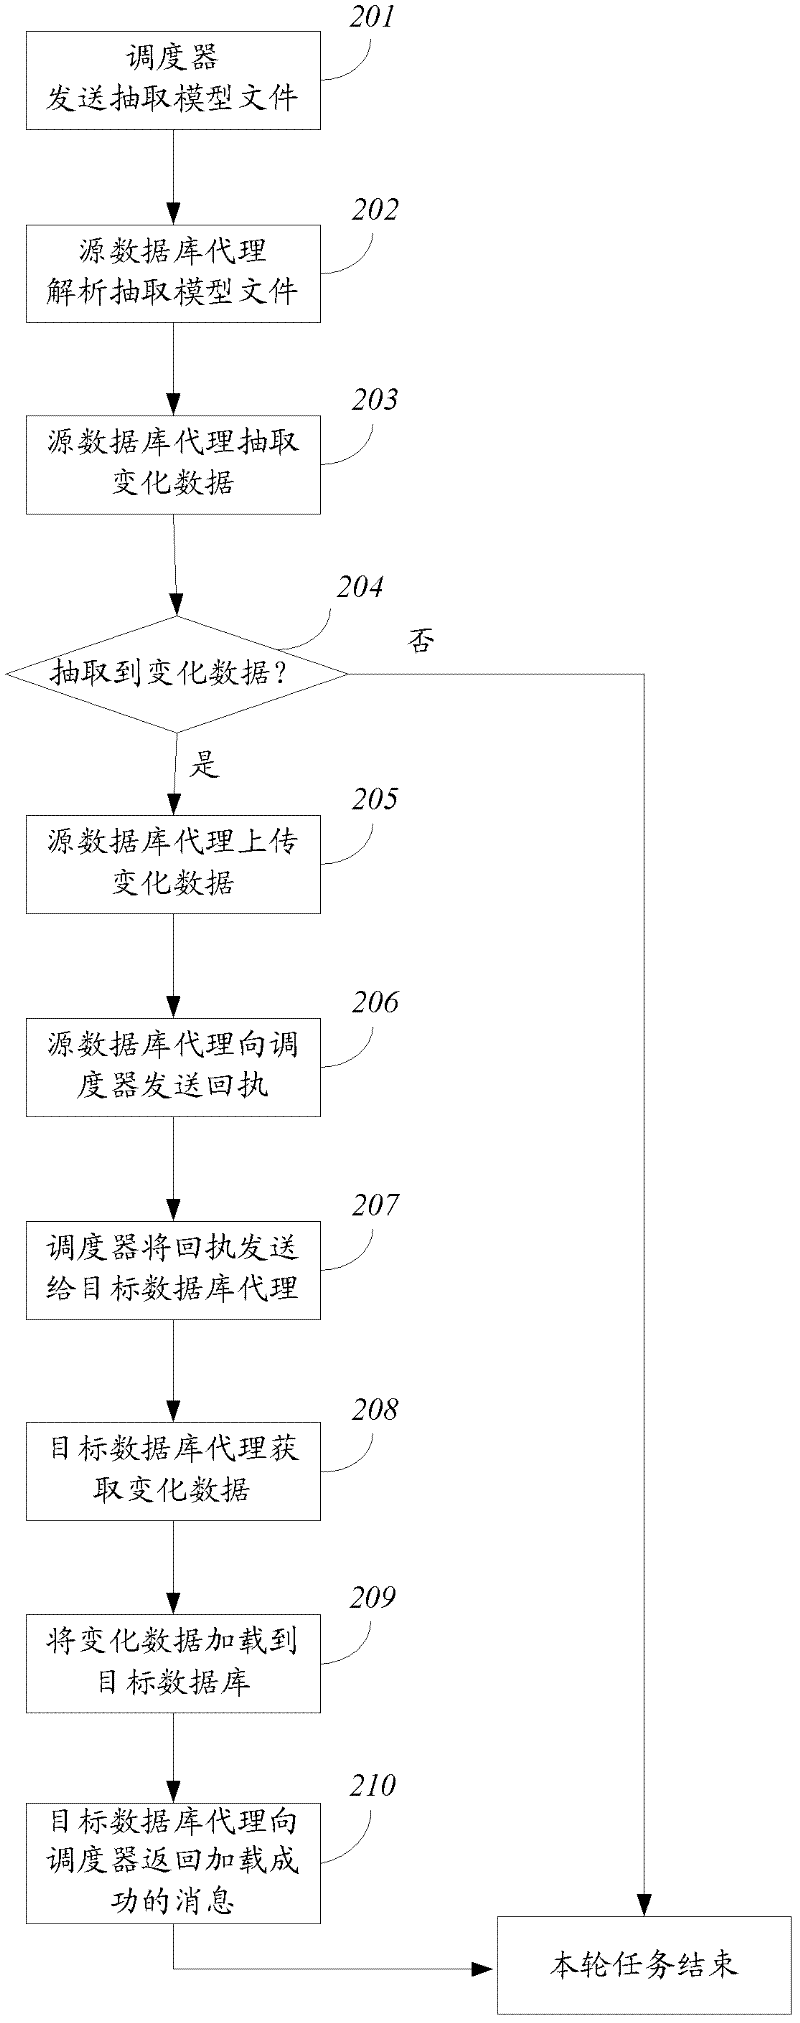 Method and system for synchronization of relational databases